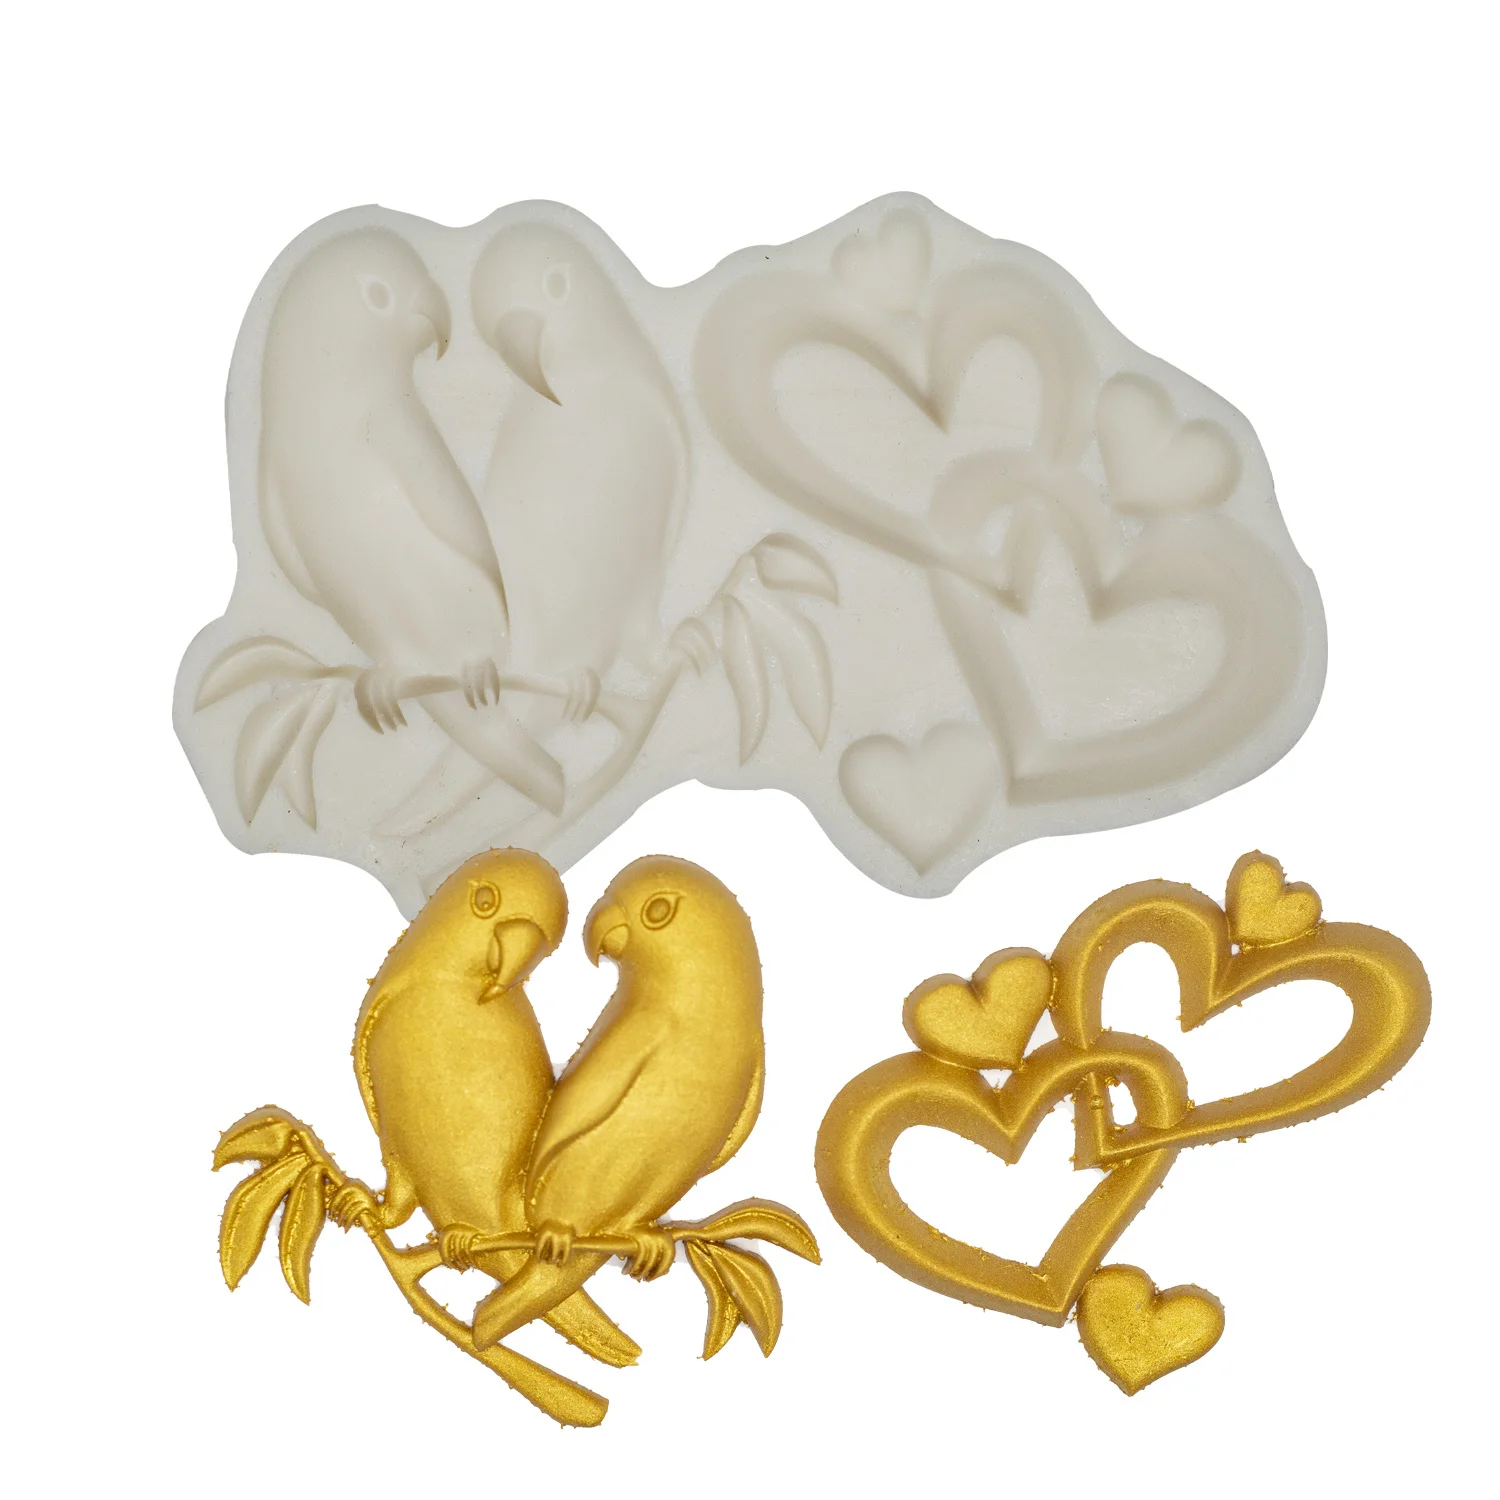 

Lovebird Silicone Cake Mold Baking Decorating Tools For DIY Pastry Chocolate Dessert Fondant Moulds Kitchen Accessories